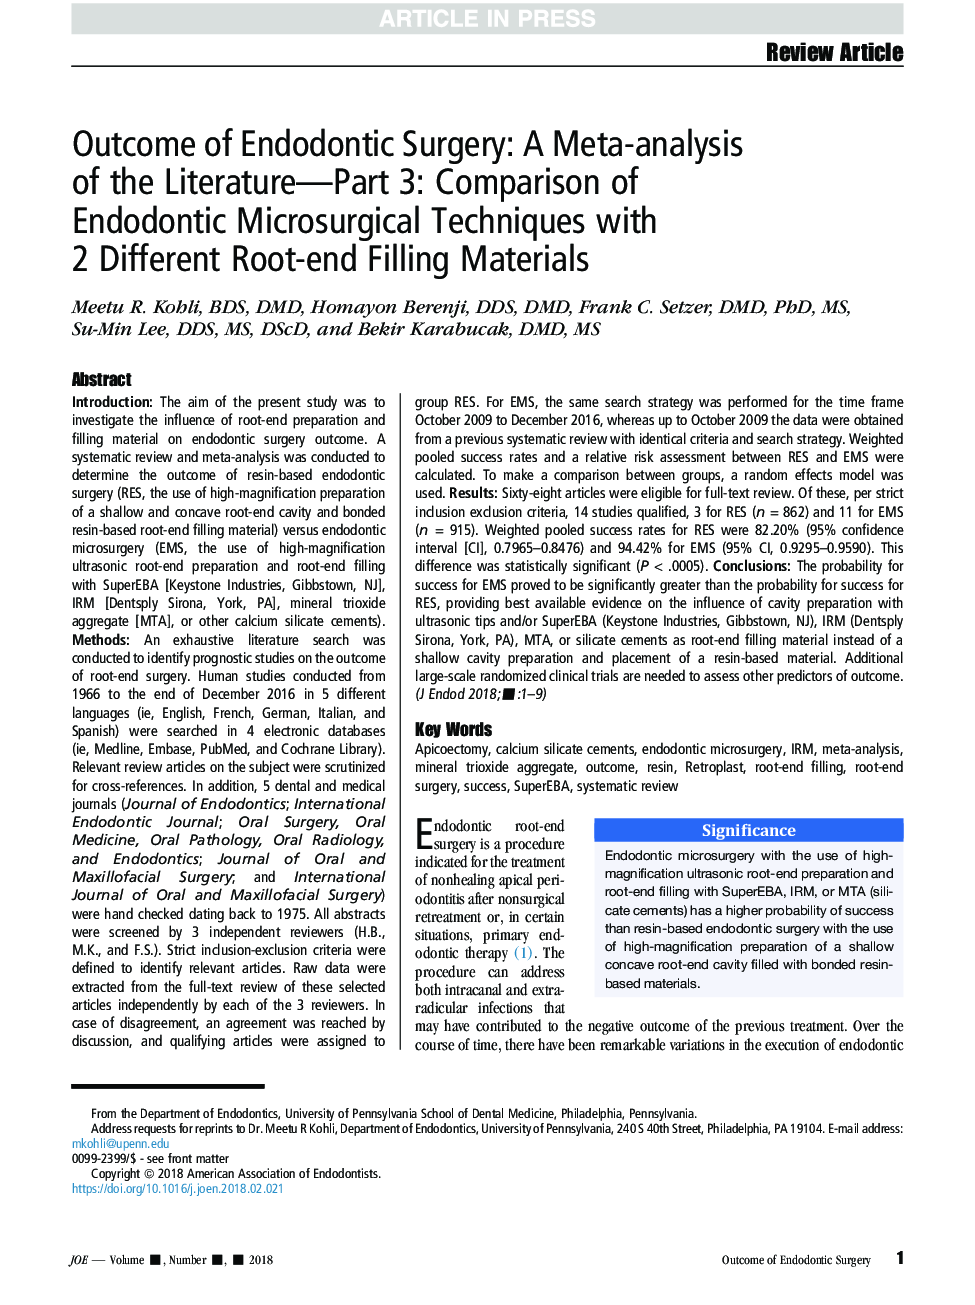 Outcome of Endodontic Surgery: A Meta-analysis of the Literature-Part 3: Comparison of Endodontic Microsurgical Techniques with 2 Different Root-end Filling Materials